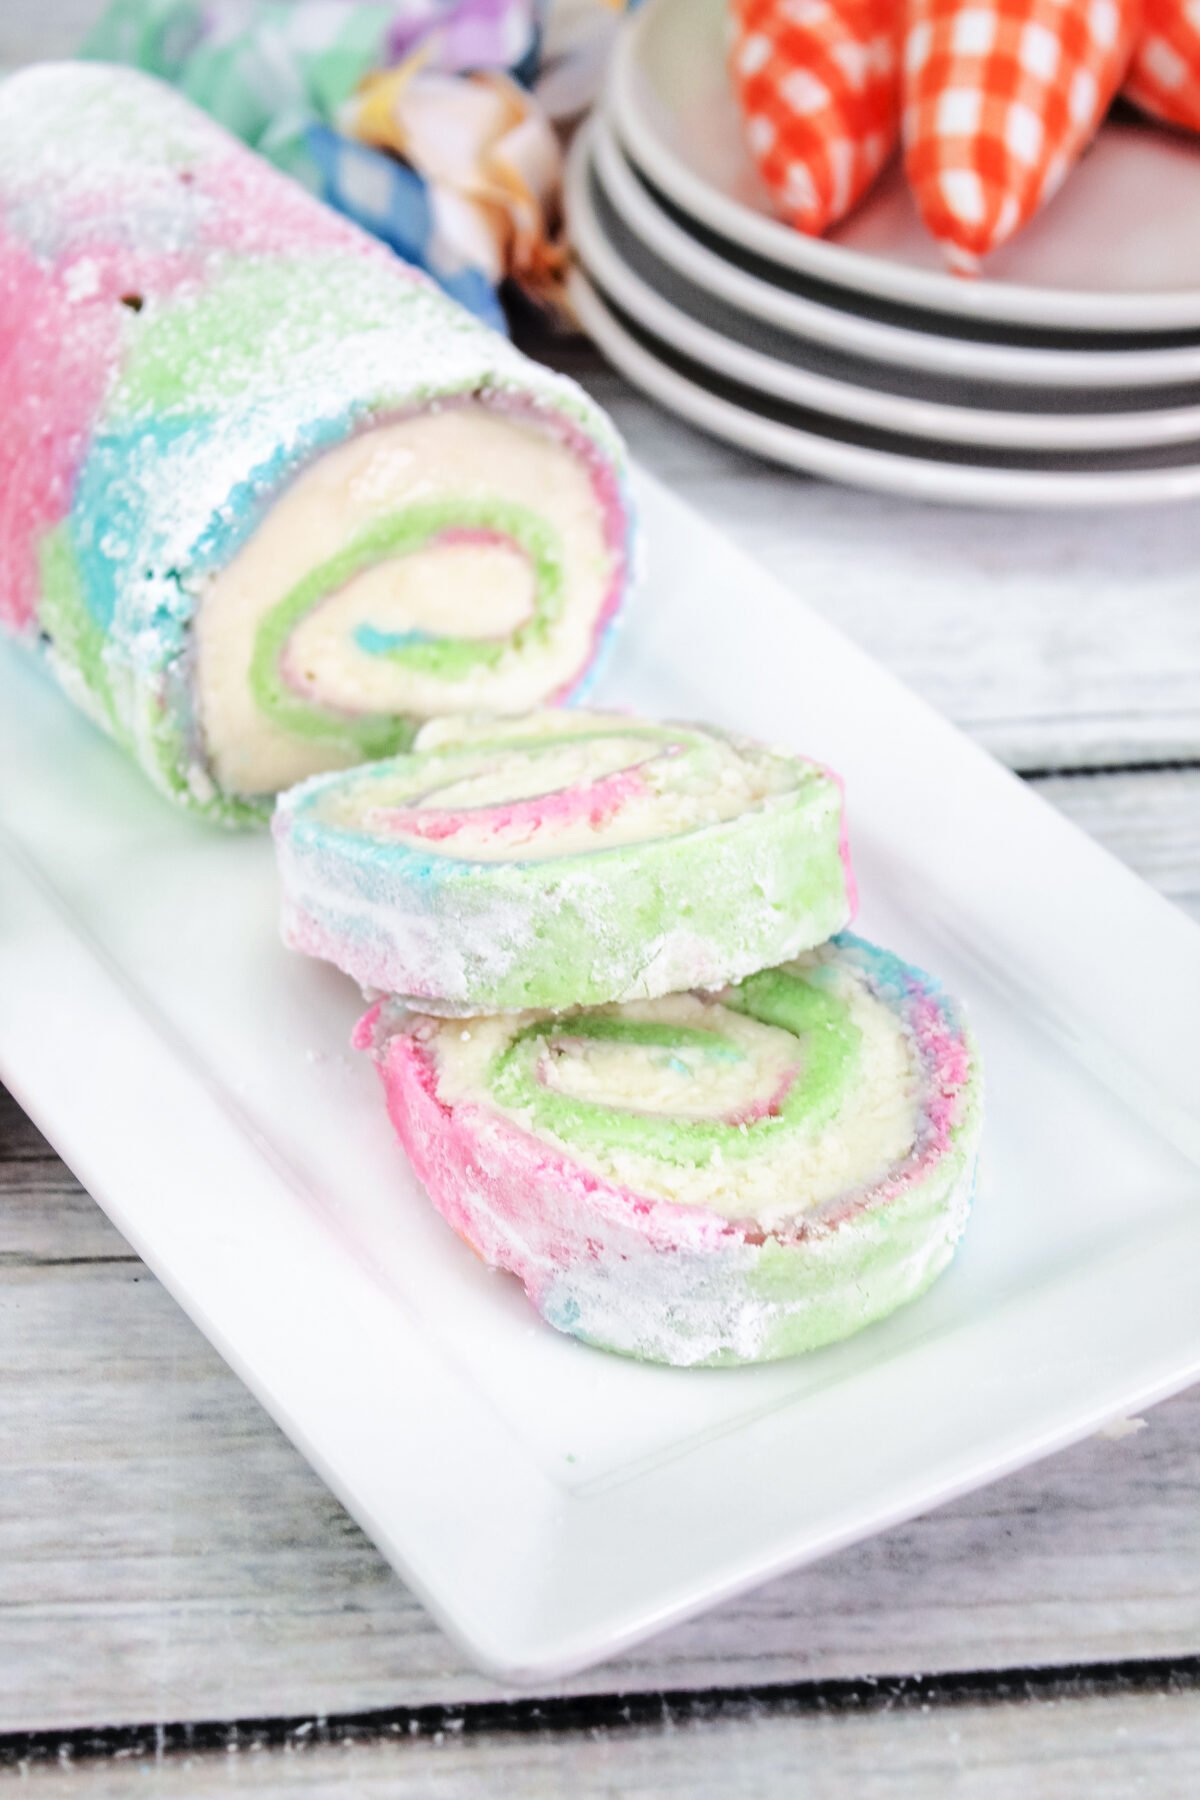 Celebrate Easter with this delicious pastel tie-dyed sponge cake. Learn how to make an impressive, yet easy Easter Swiss Roll recipe here!